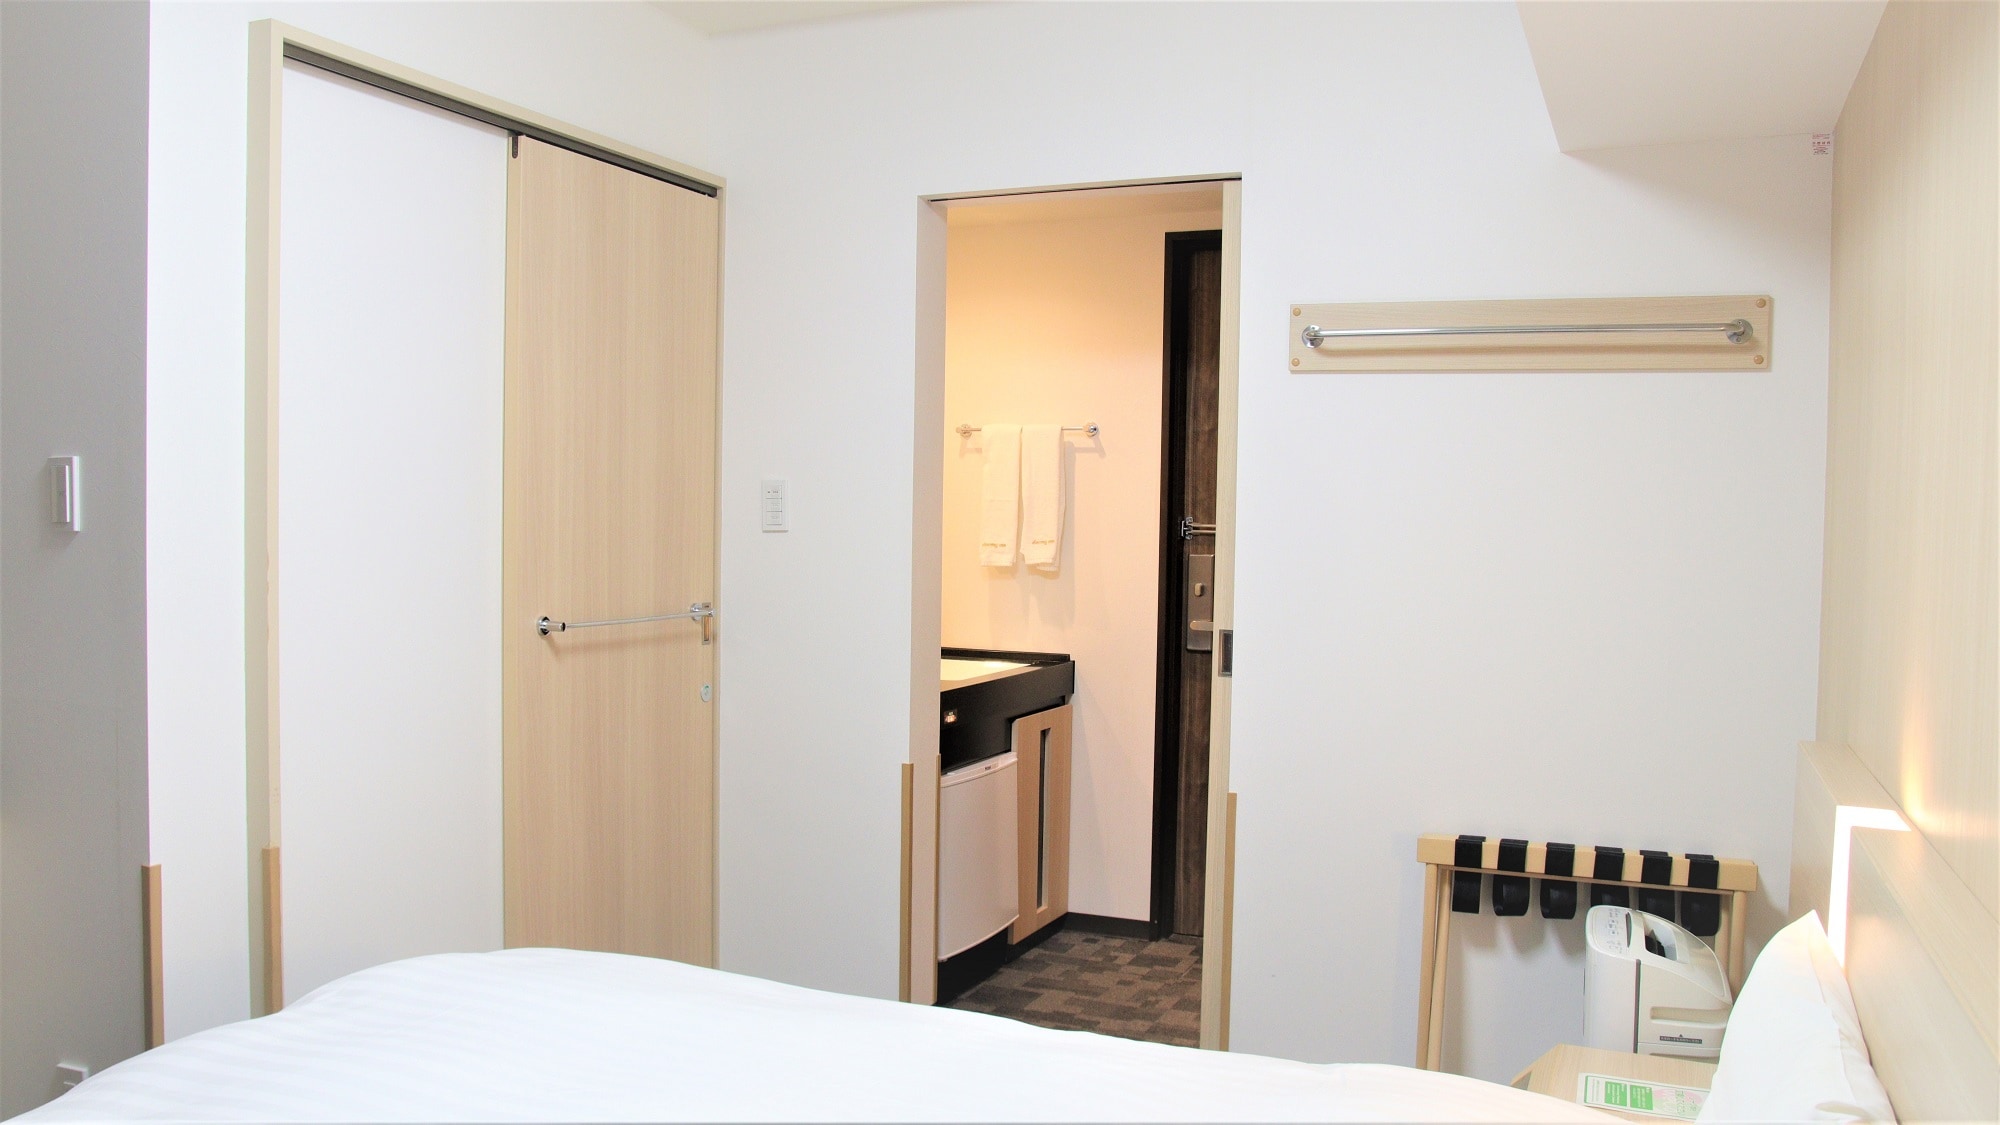 ◆ Twin room 18.2㎡ 100 & times; 195cm 2 beds made by Serta